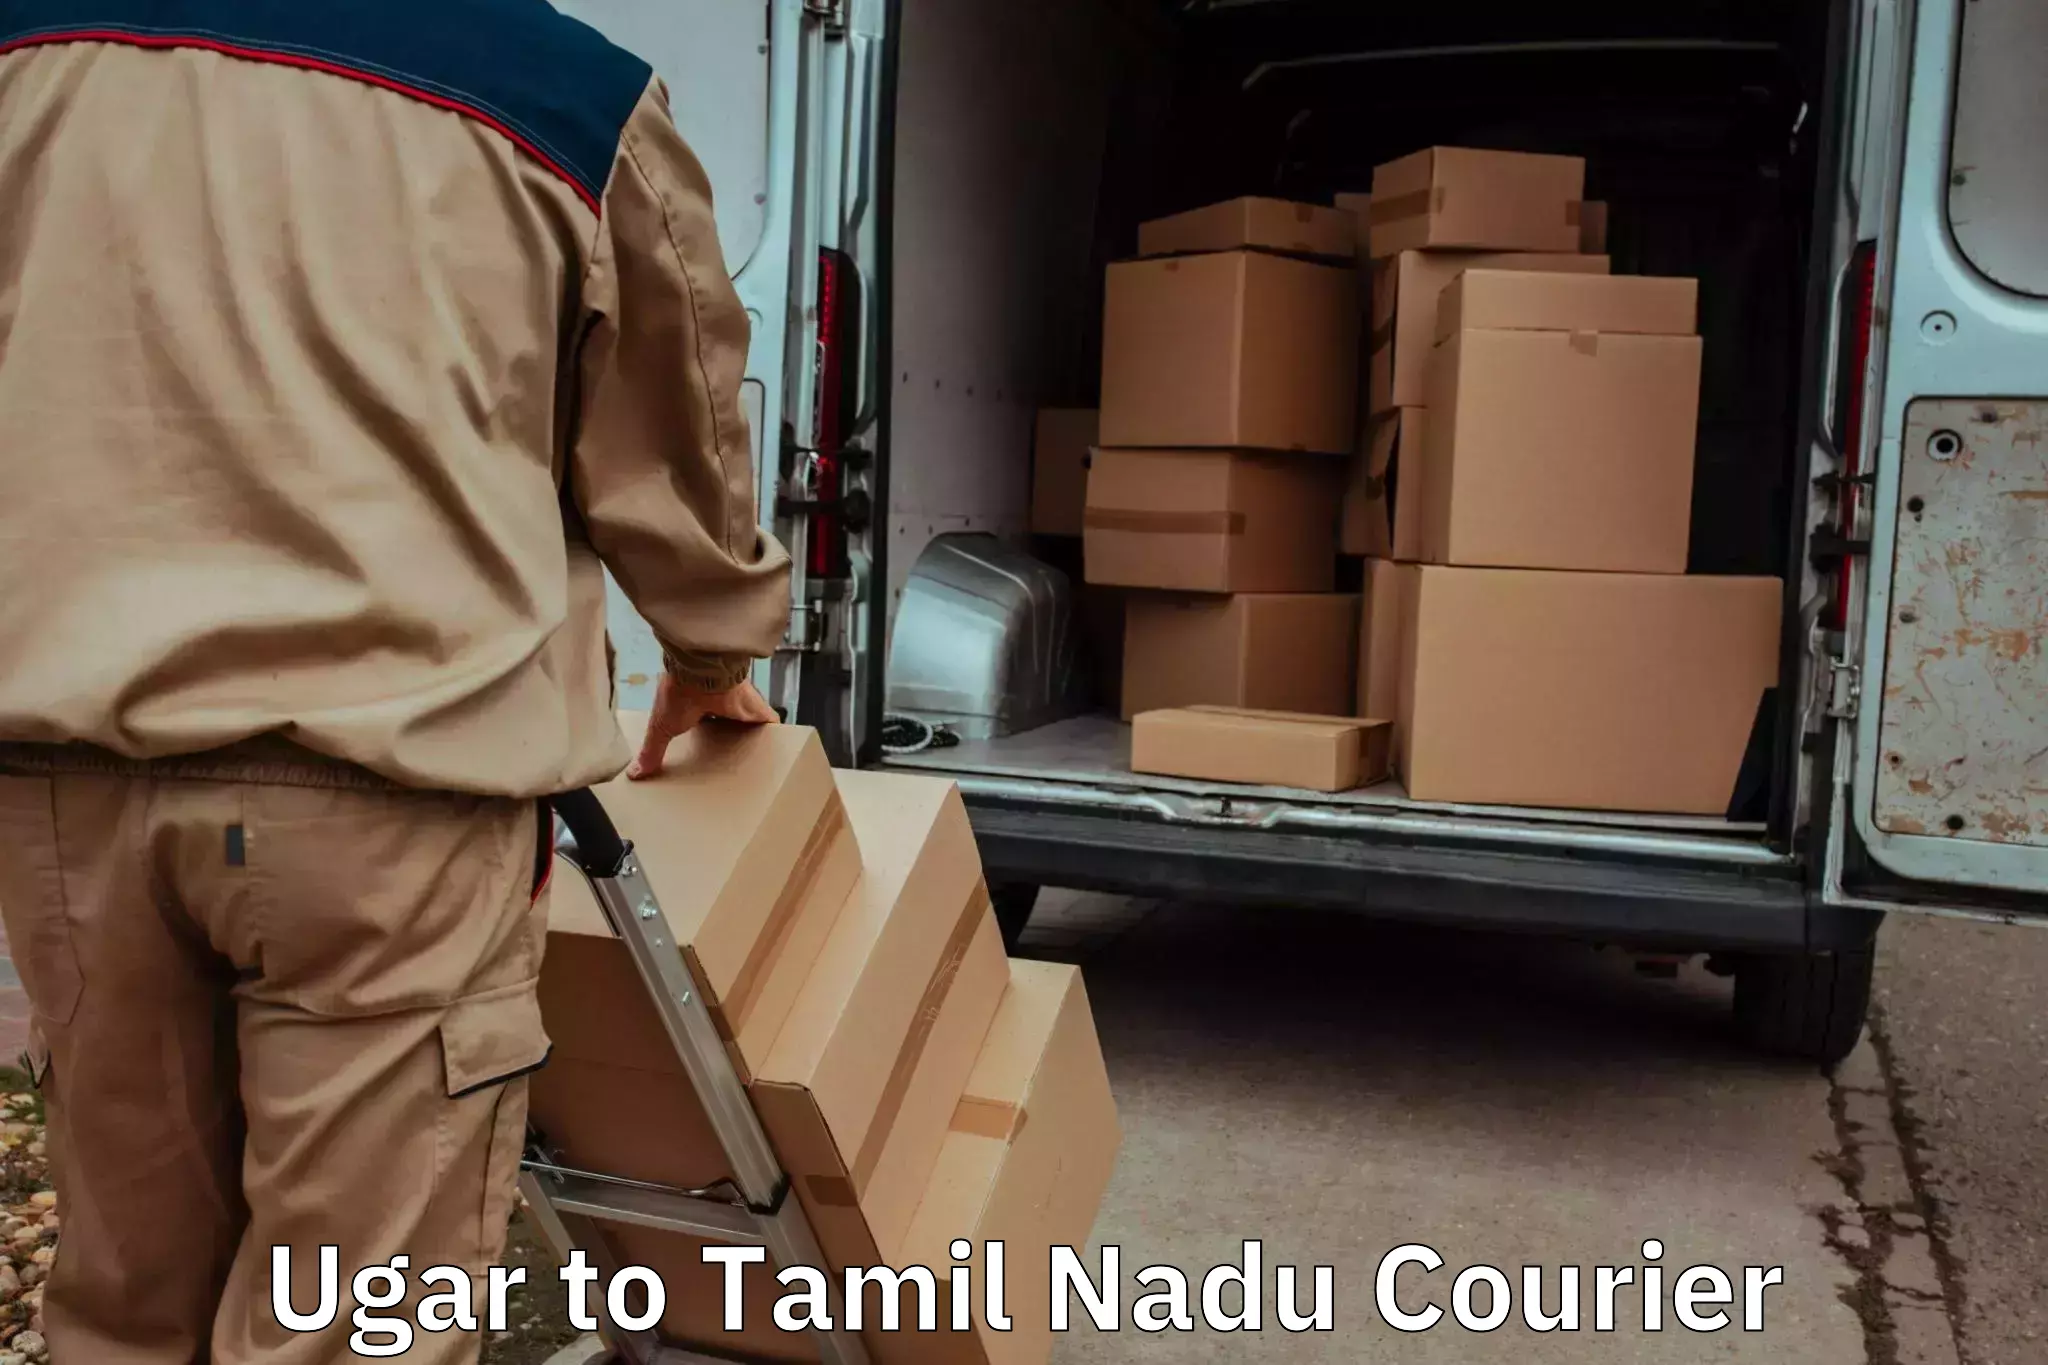 Trusted moving company Ugar to Tamil Nadu